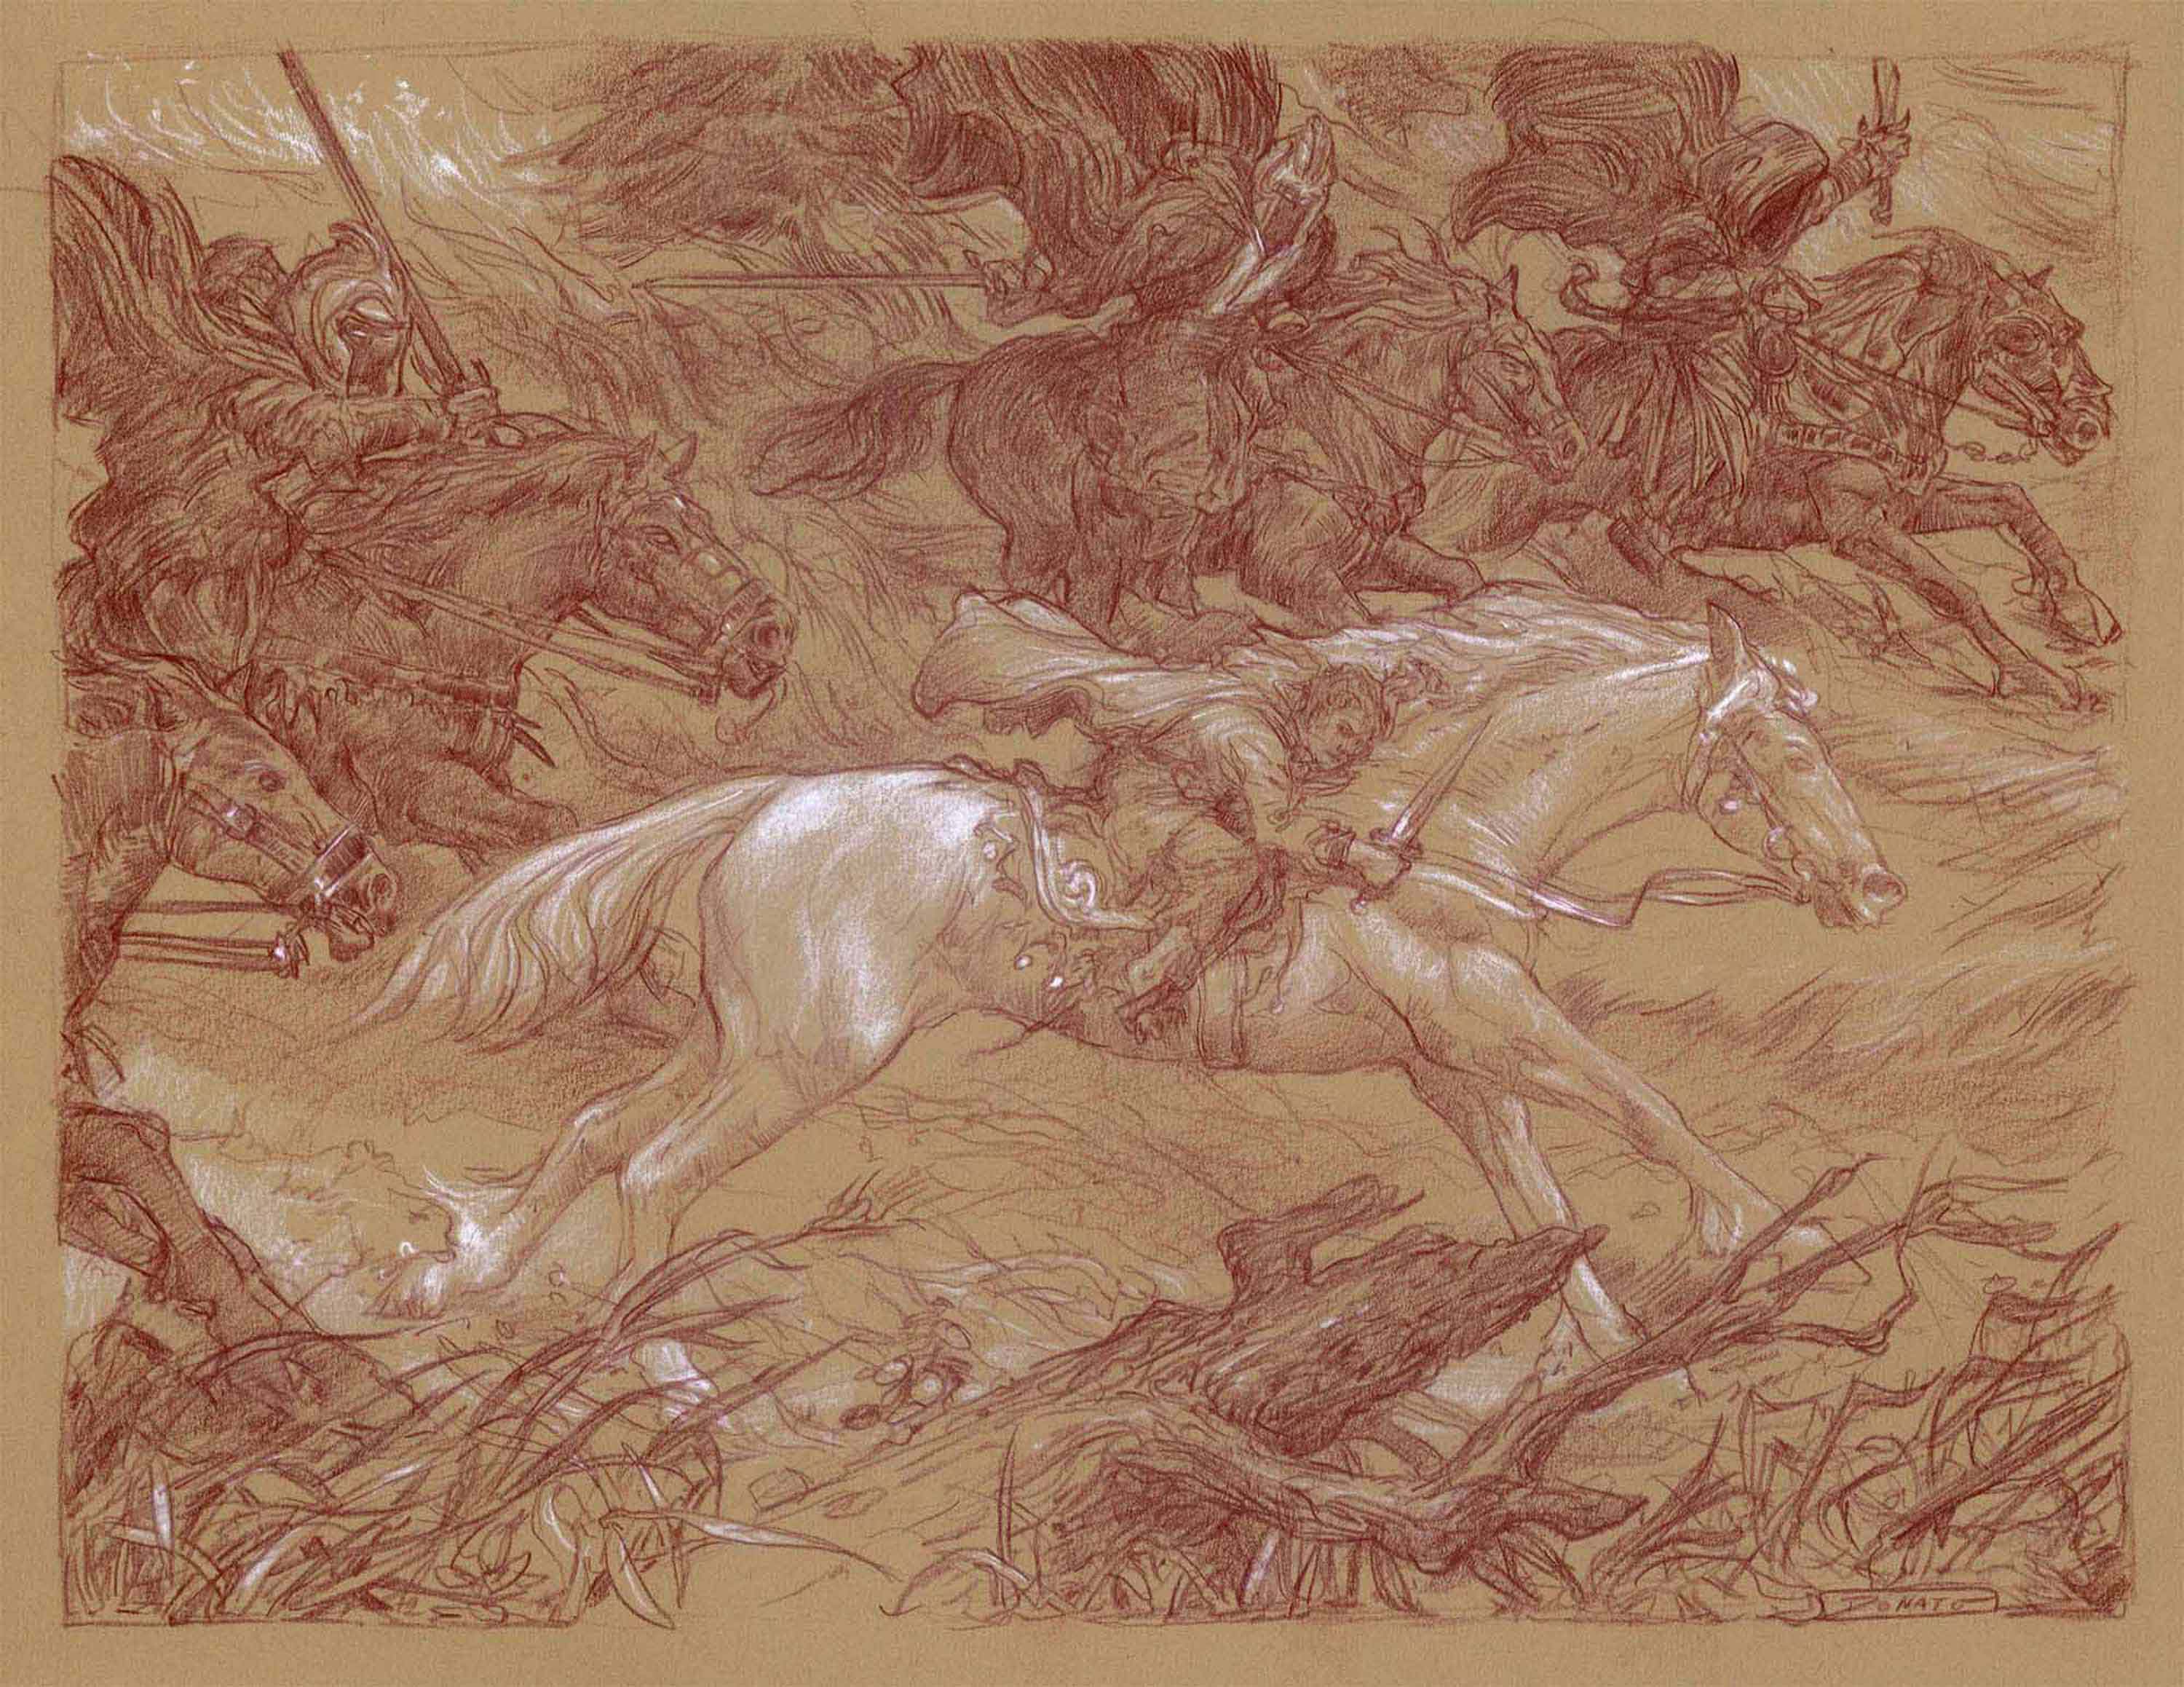 Flight to the Ford
14" x11"  Watercolor Pencil and Chalk on Toned paper 2010
collection of the artist